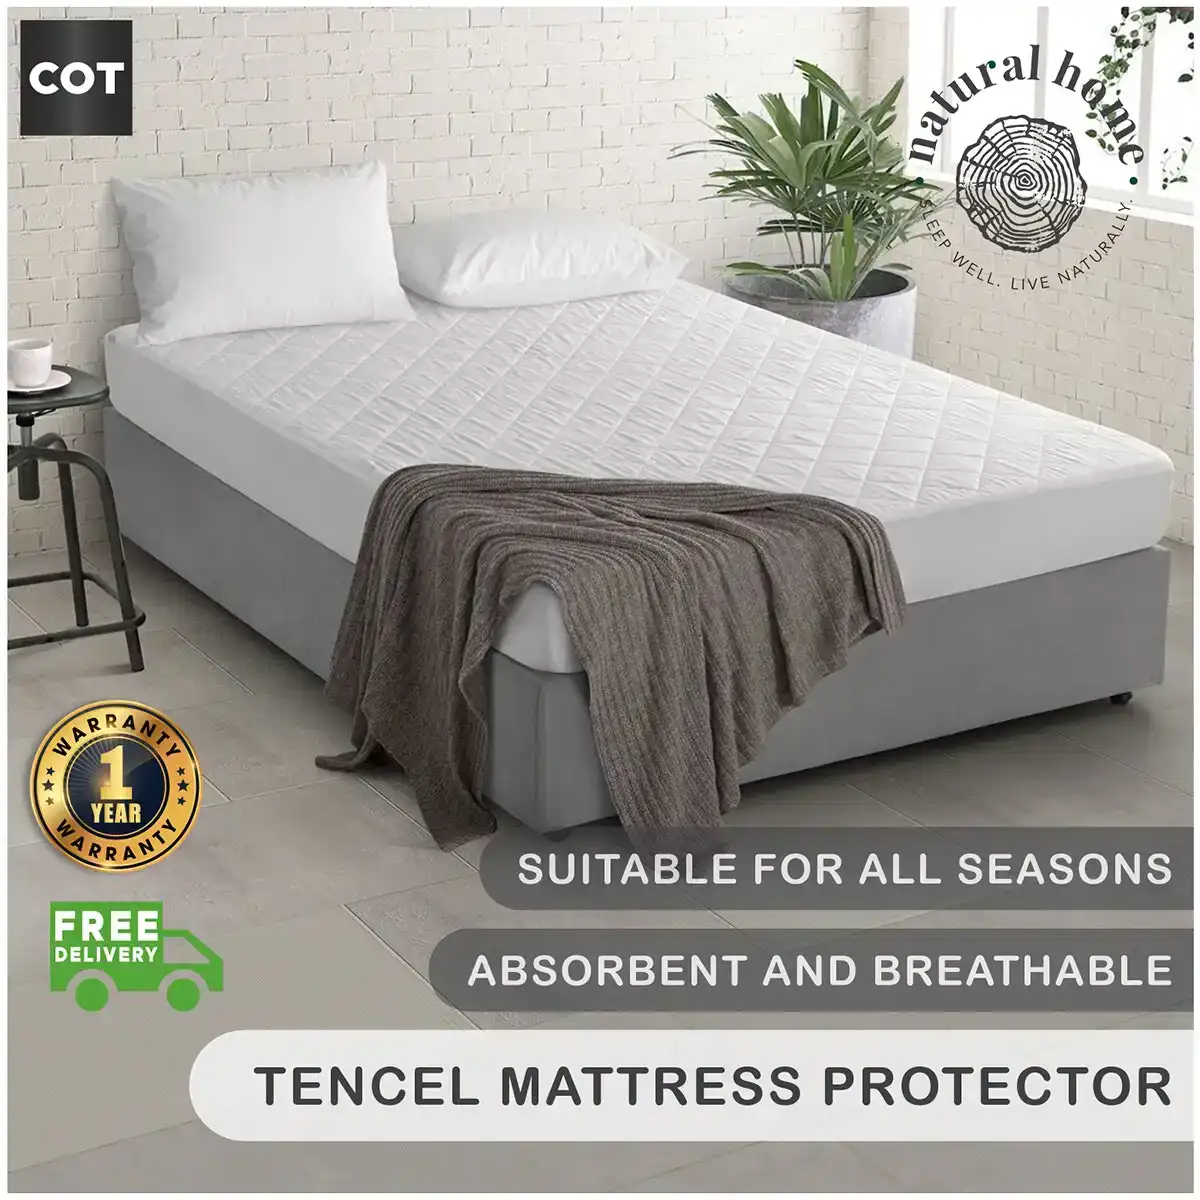 Natural Home Tencel Quilted Mattress Protector White COT